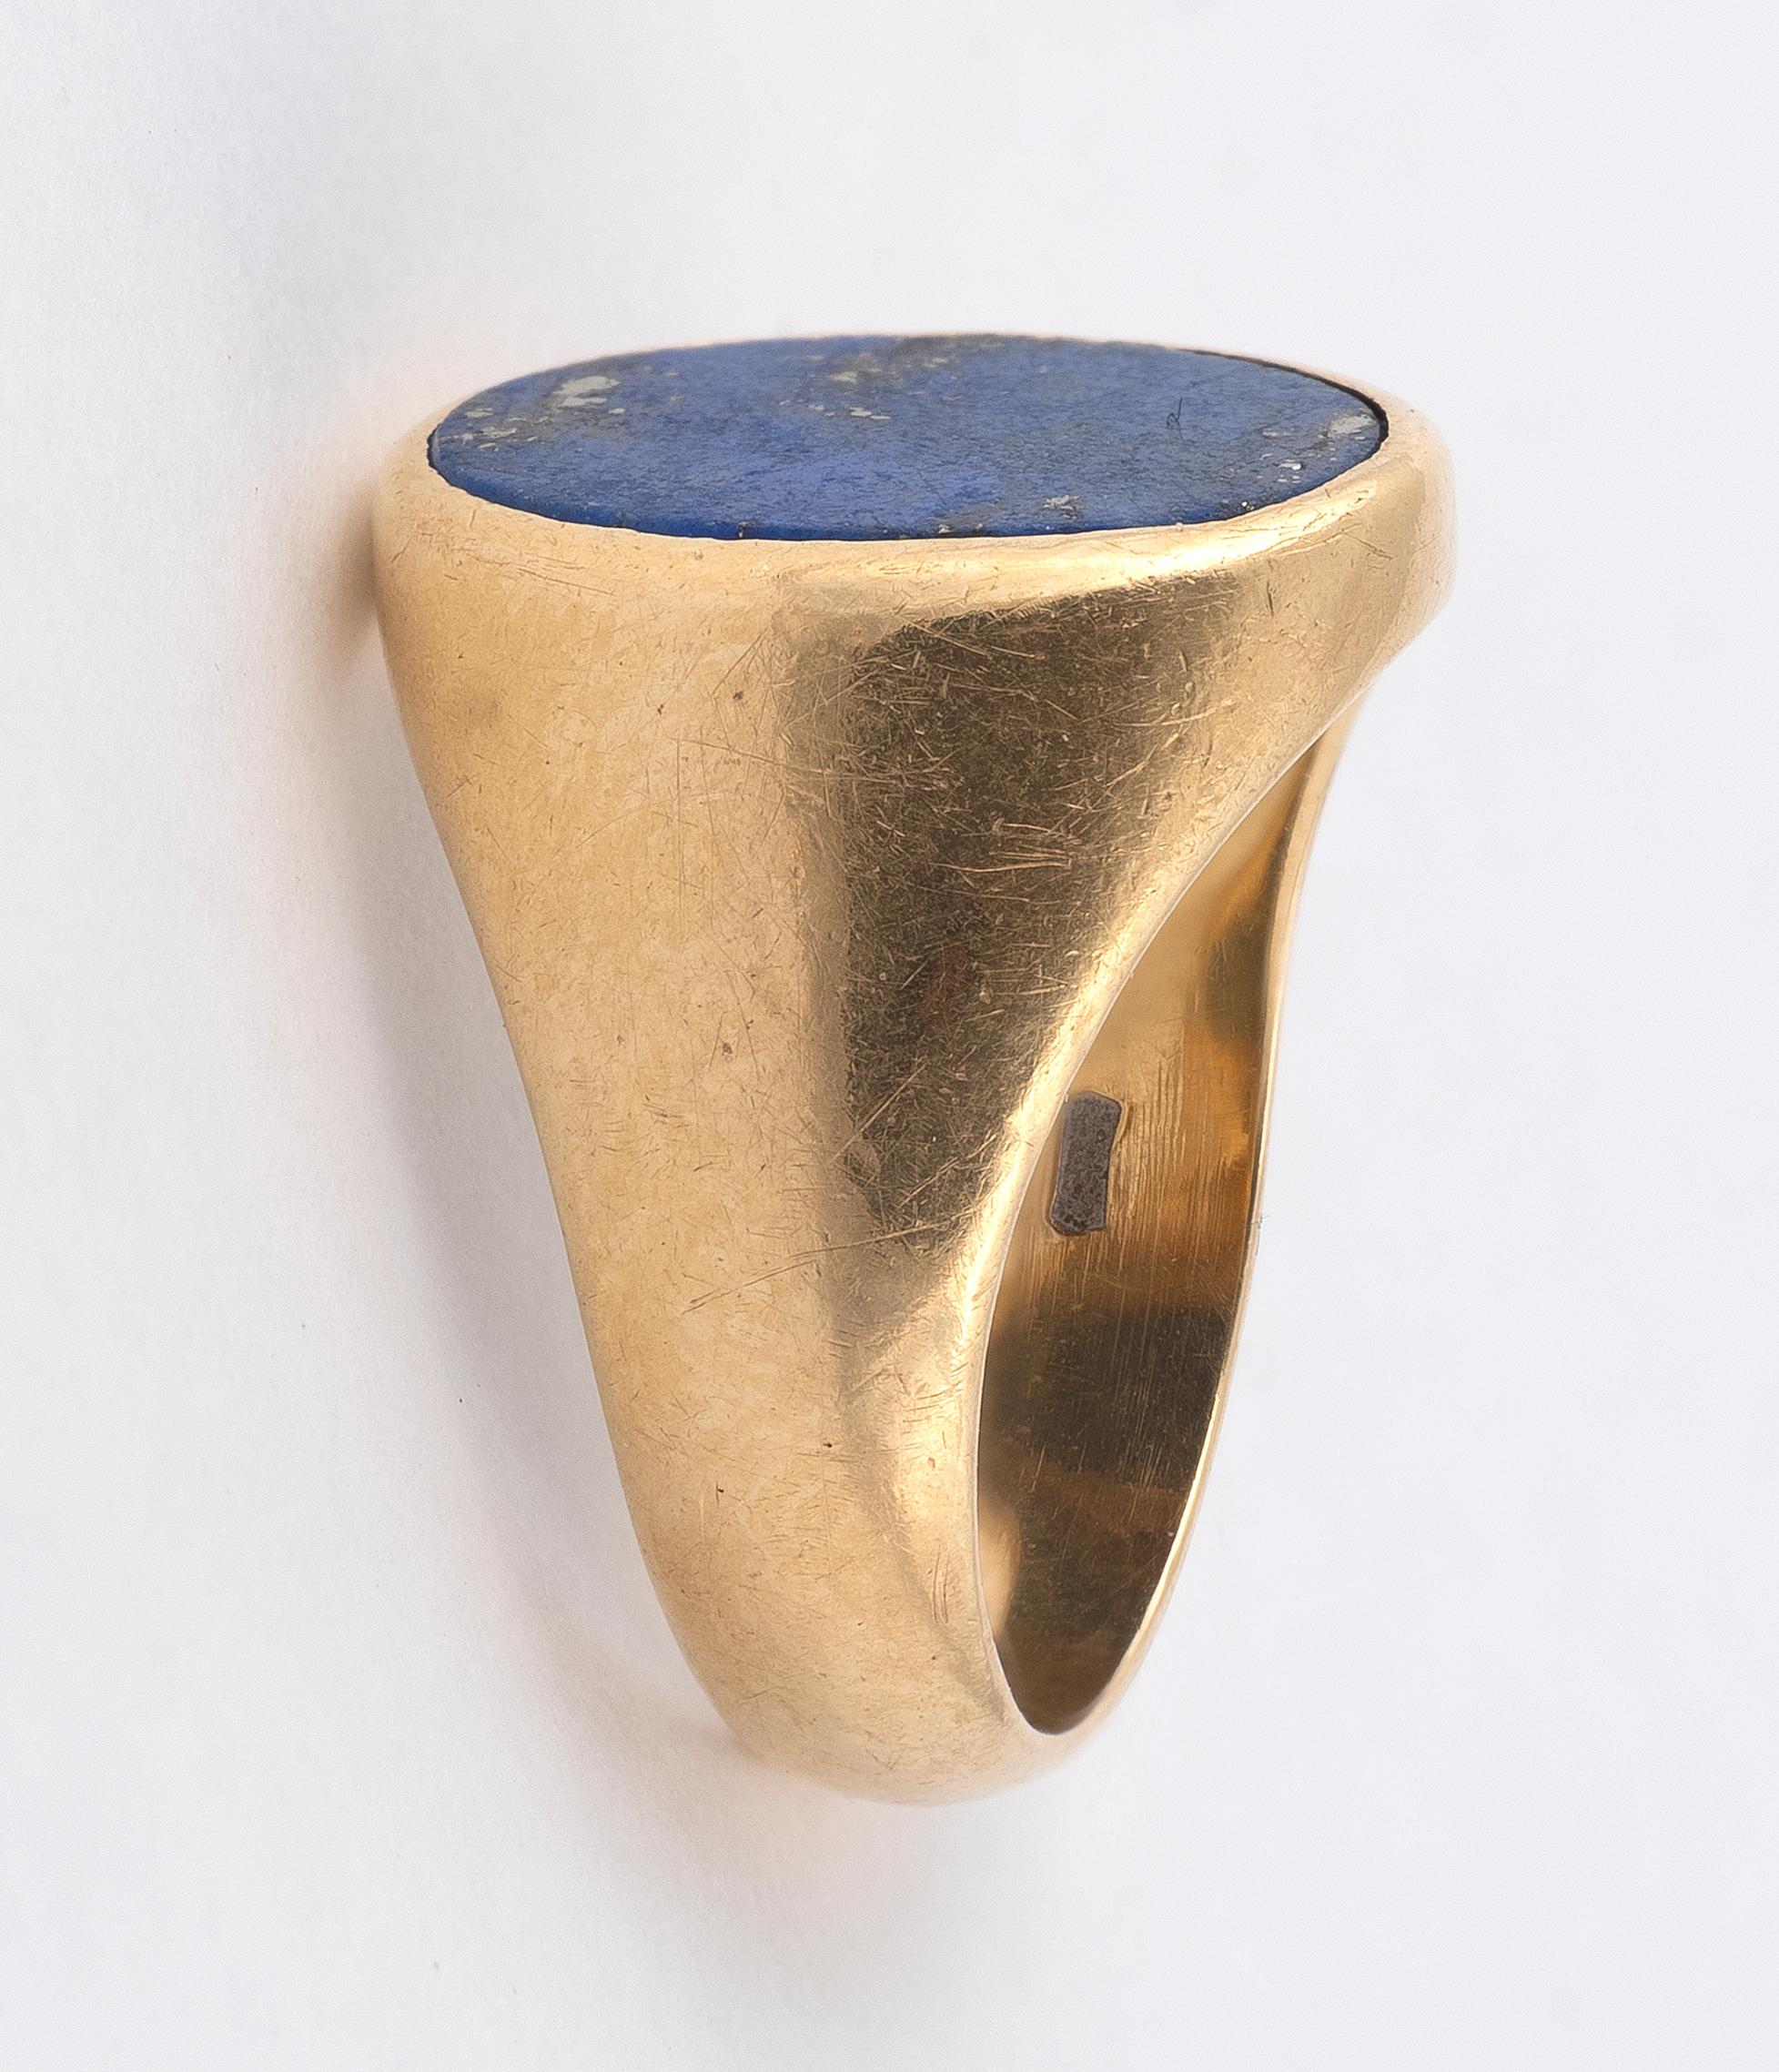 Centering a lapis lazuli tablet measuring approximately 15mm x 10mm; mounted in 18k gold; size: 5
Weight : 6,52gr